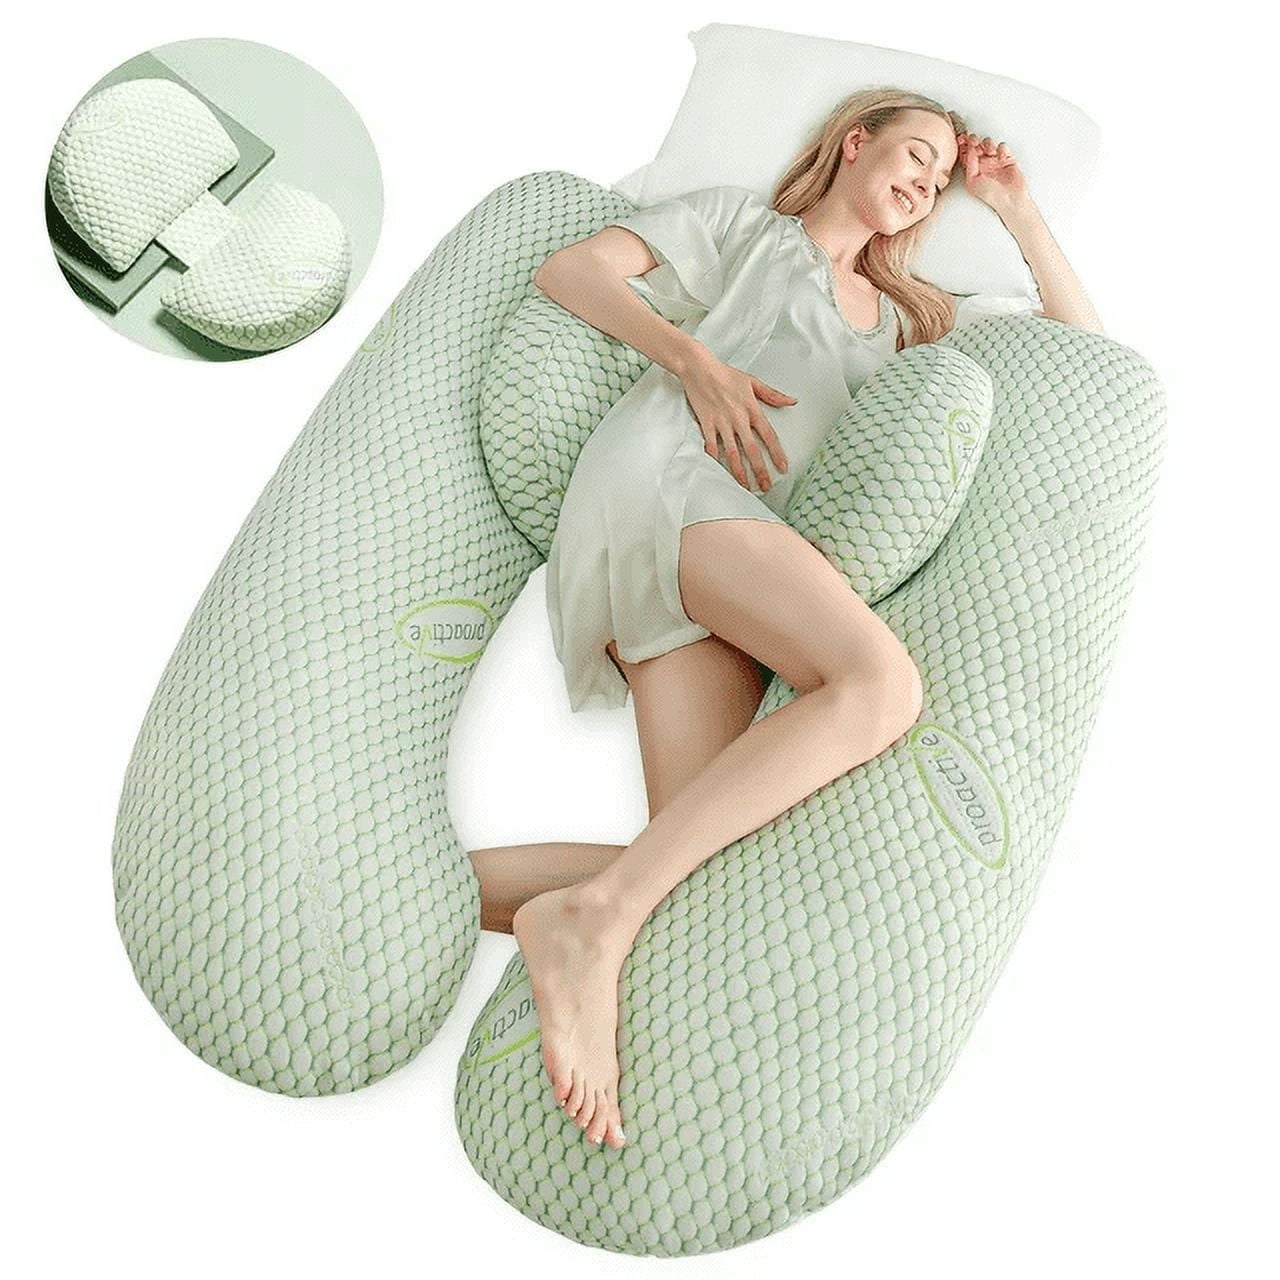 iFanze Pregnancy Pillows for Sleeping Support, 3-In-1 U Shaped Full Body  Maternity Pillow with Removable Cover Pregnancy Pillows for Back Hips Legs